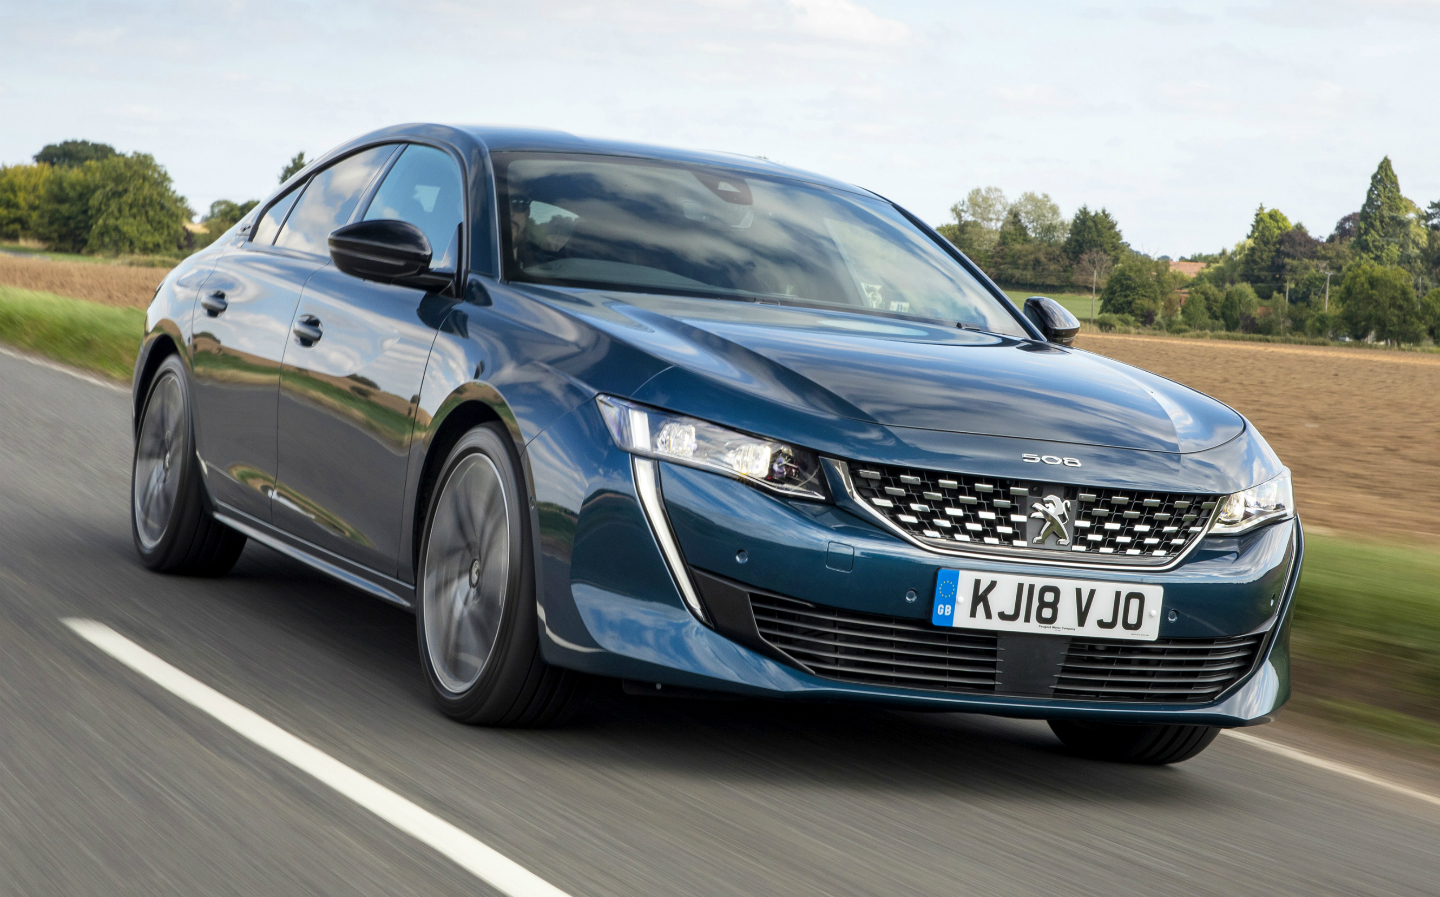 Sunday Times Motor Awards 2019 Best Designed Car of the Year nominee. Peugeot 508